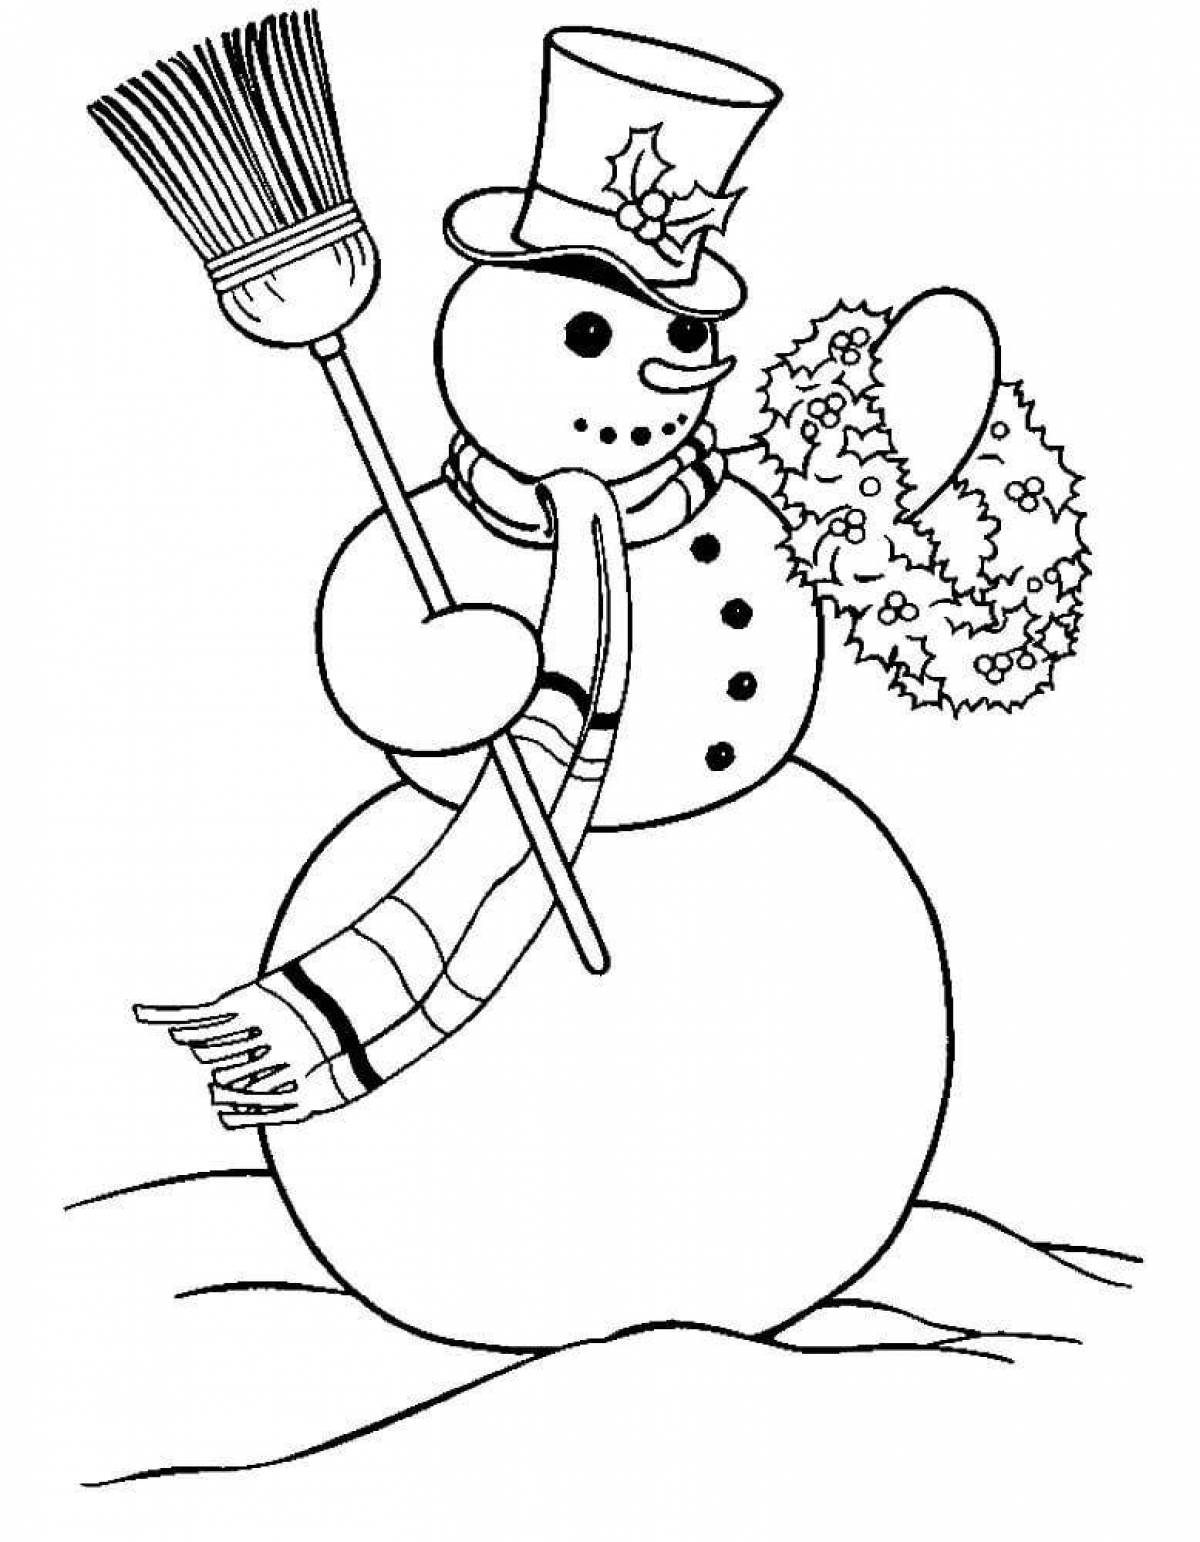 Snickering postman snowman coloring book